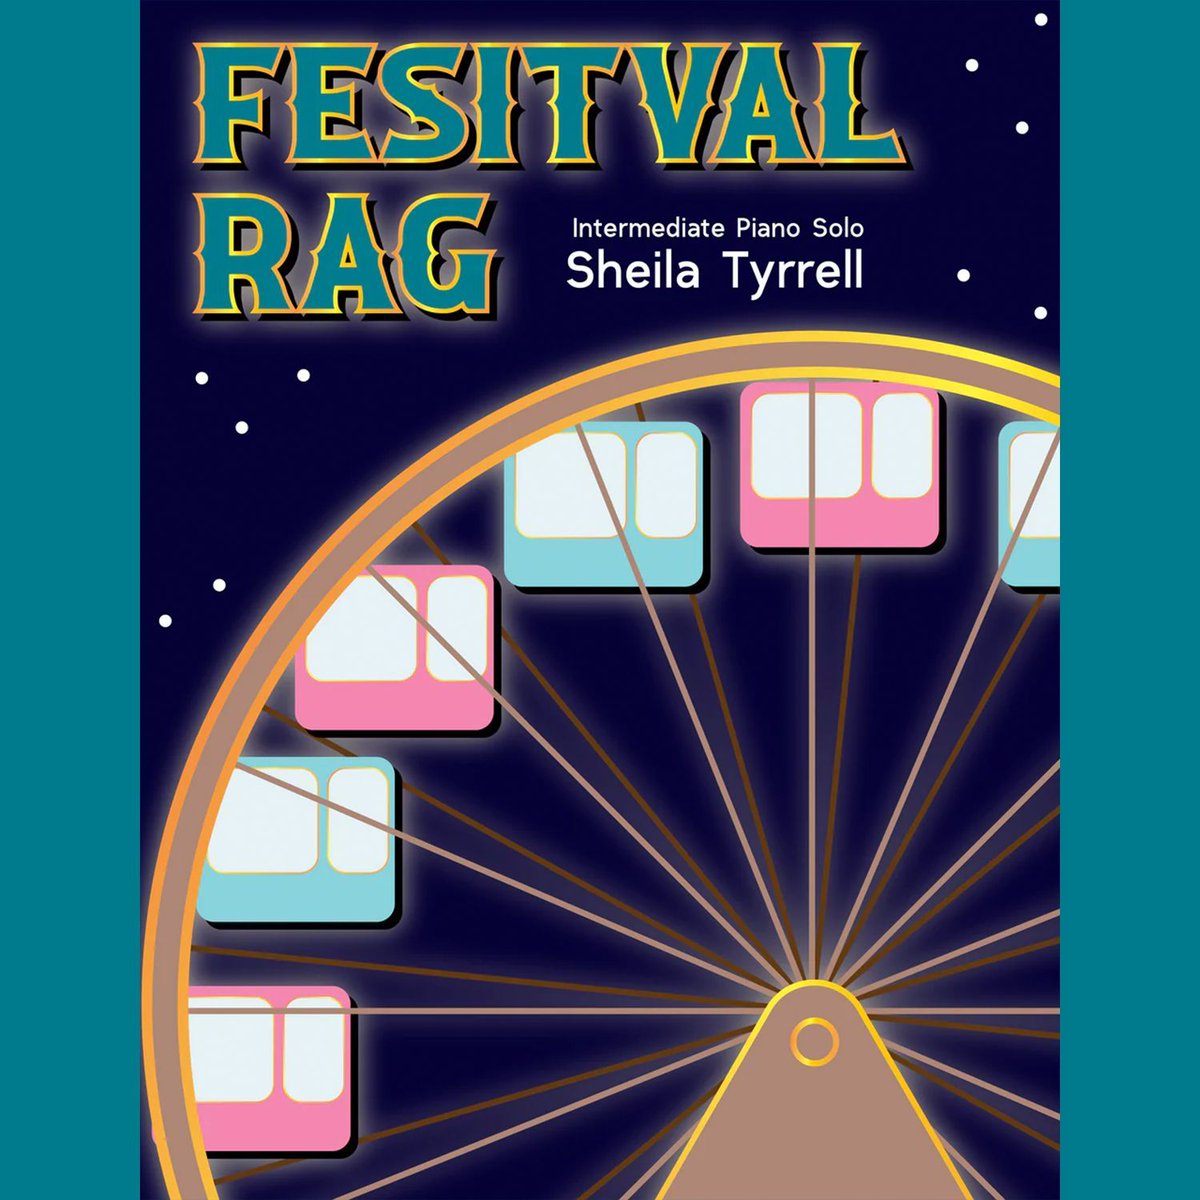 Join in on the festival and get your copy of Festival Rag from Debra Wanless Music
buff.ly/3TTcgn5 
.
.
.
.
.
#piano #music #sheetmusic #pianosolos #pianoteacher #pianobook #musicteacher #musicbook #pianocover  #pianocover #pianoreels #pianopublic